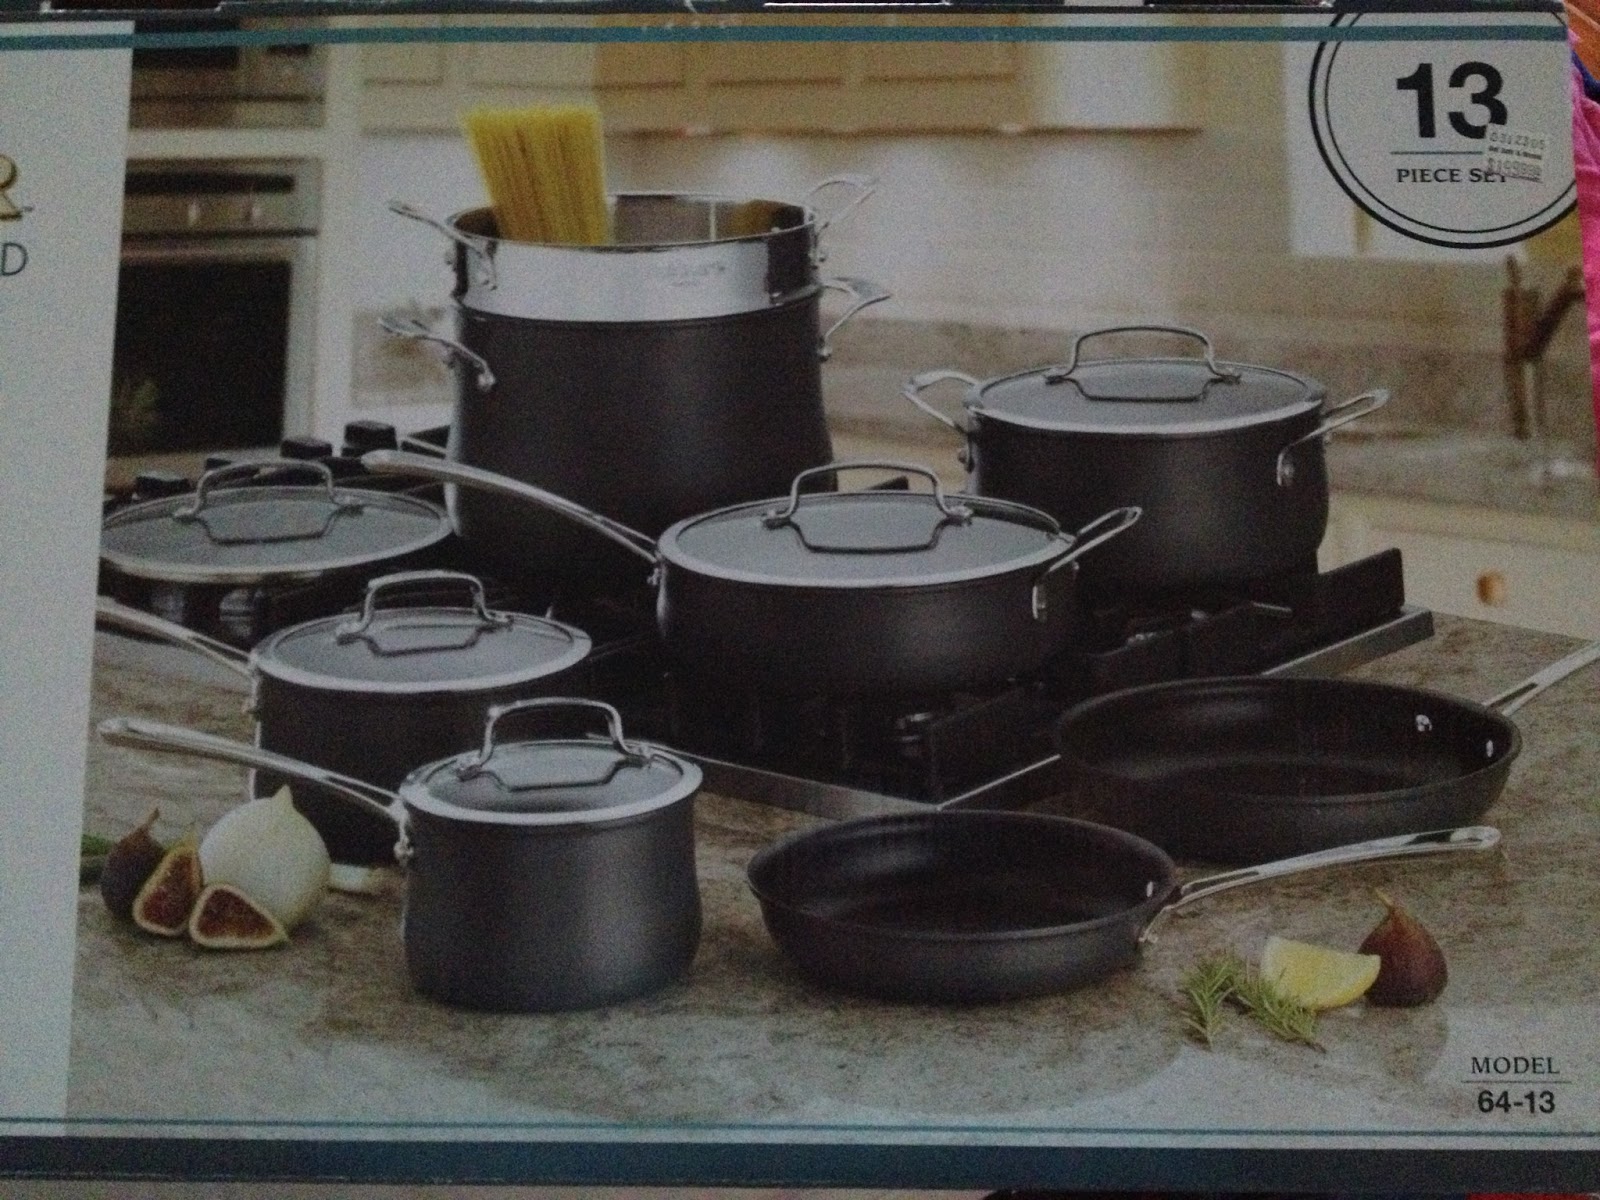 Tramontina 15-Piece Stainless Steel Cookware Set - Sam's Club